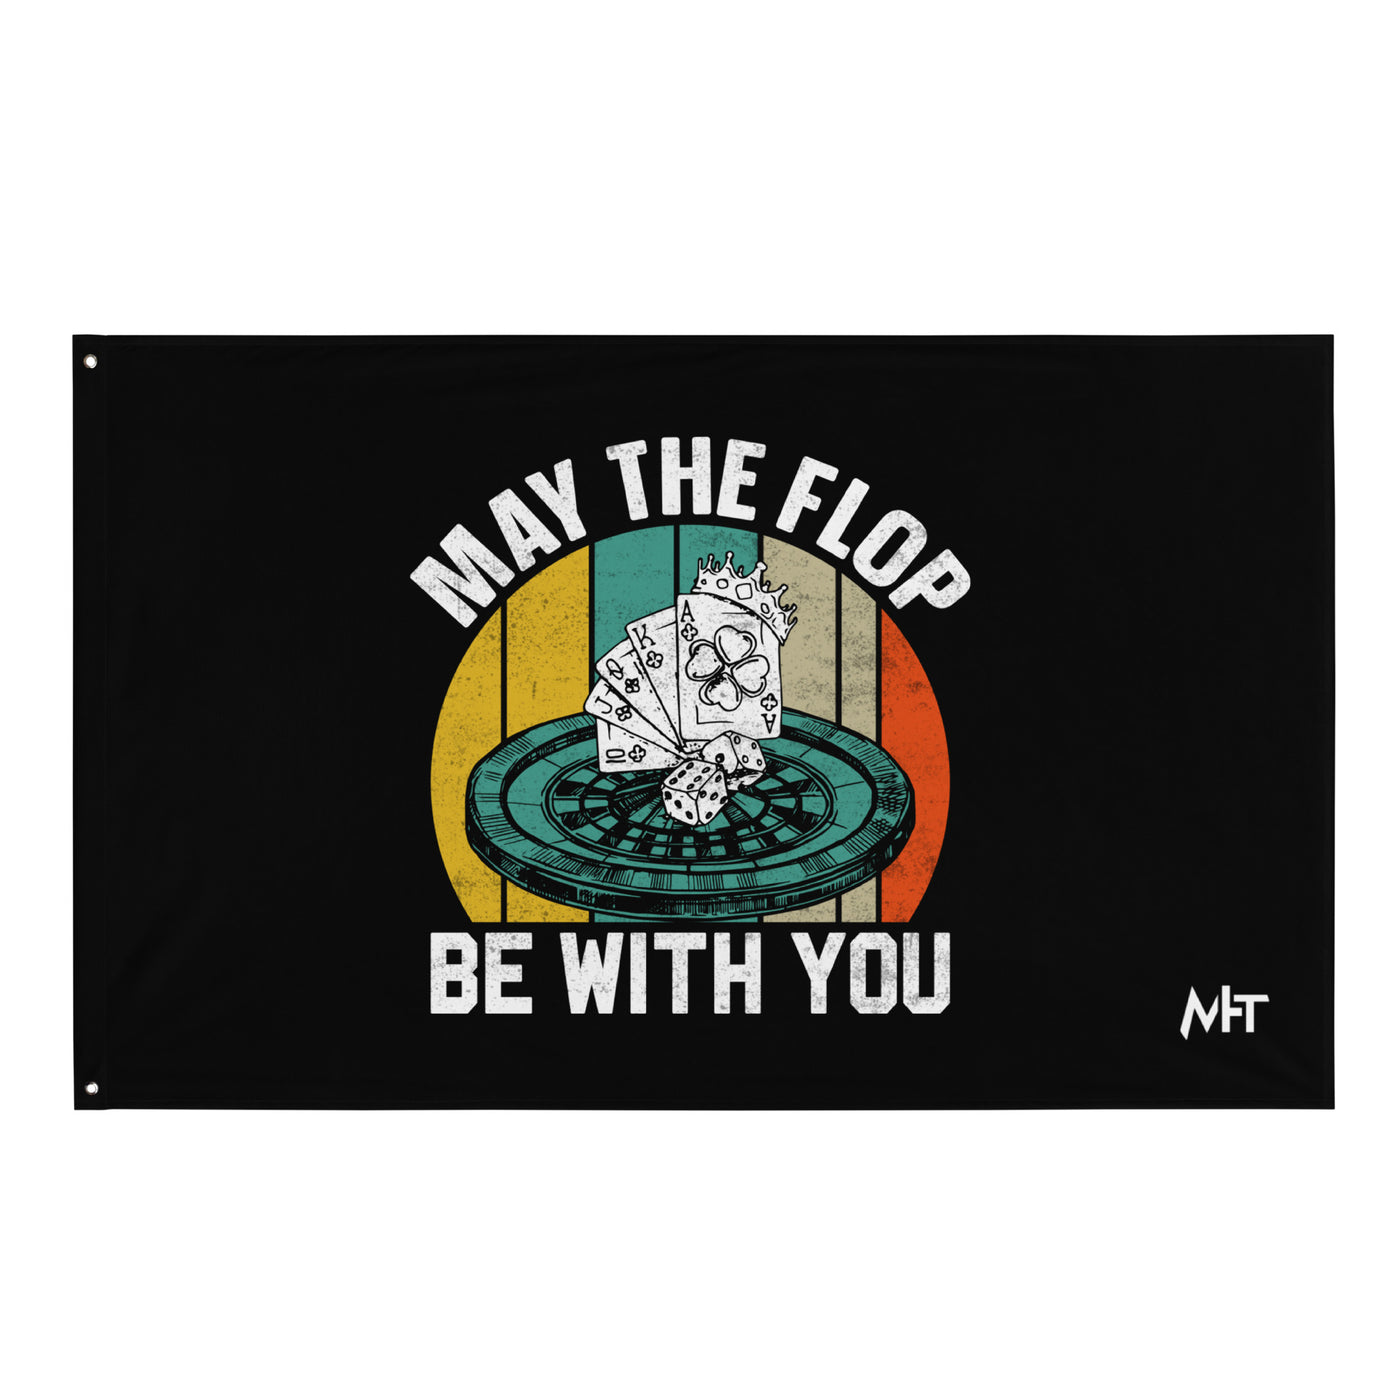 May the Flop be with you - Flag